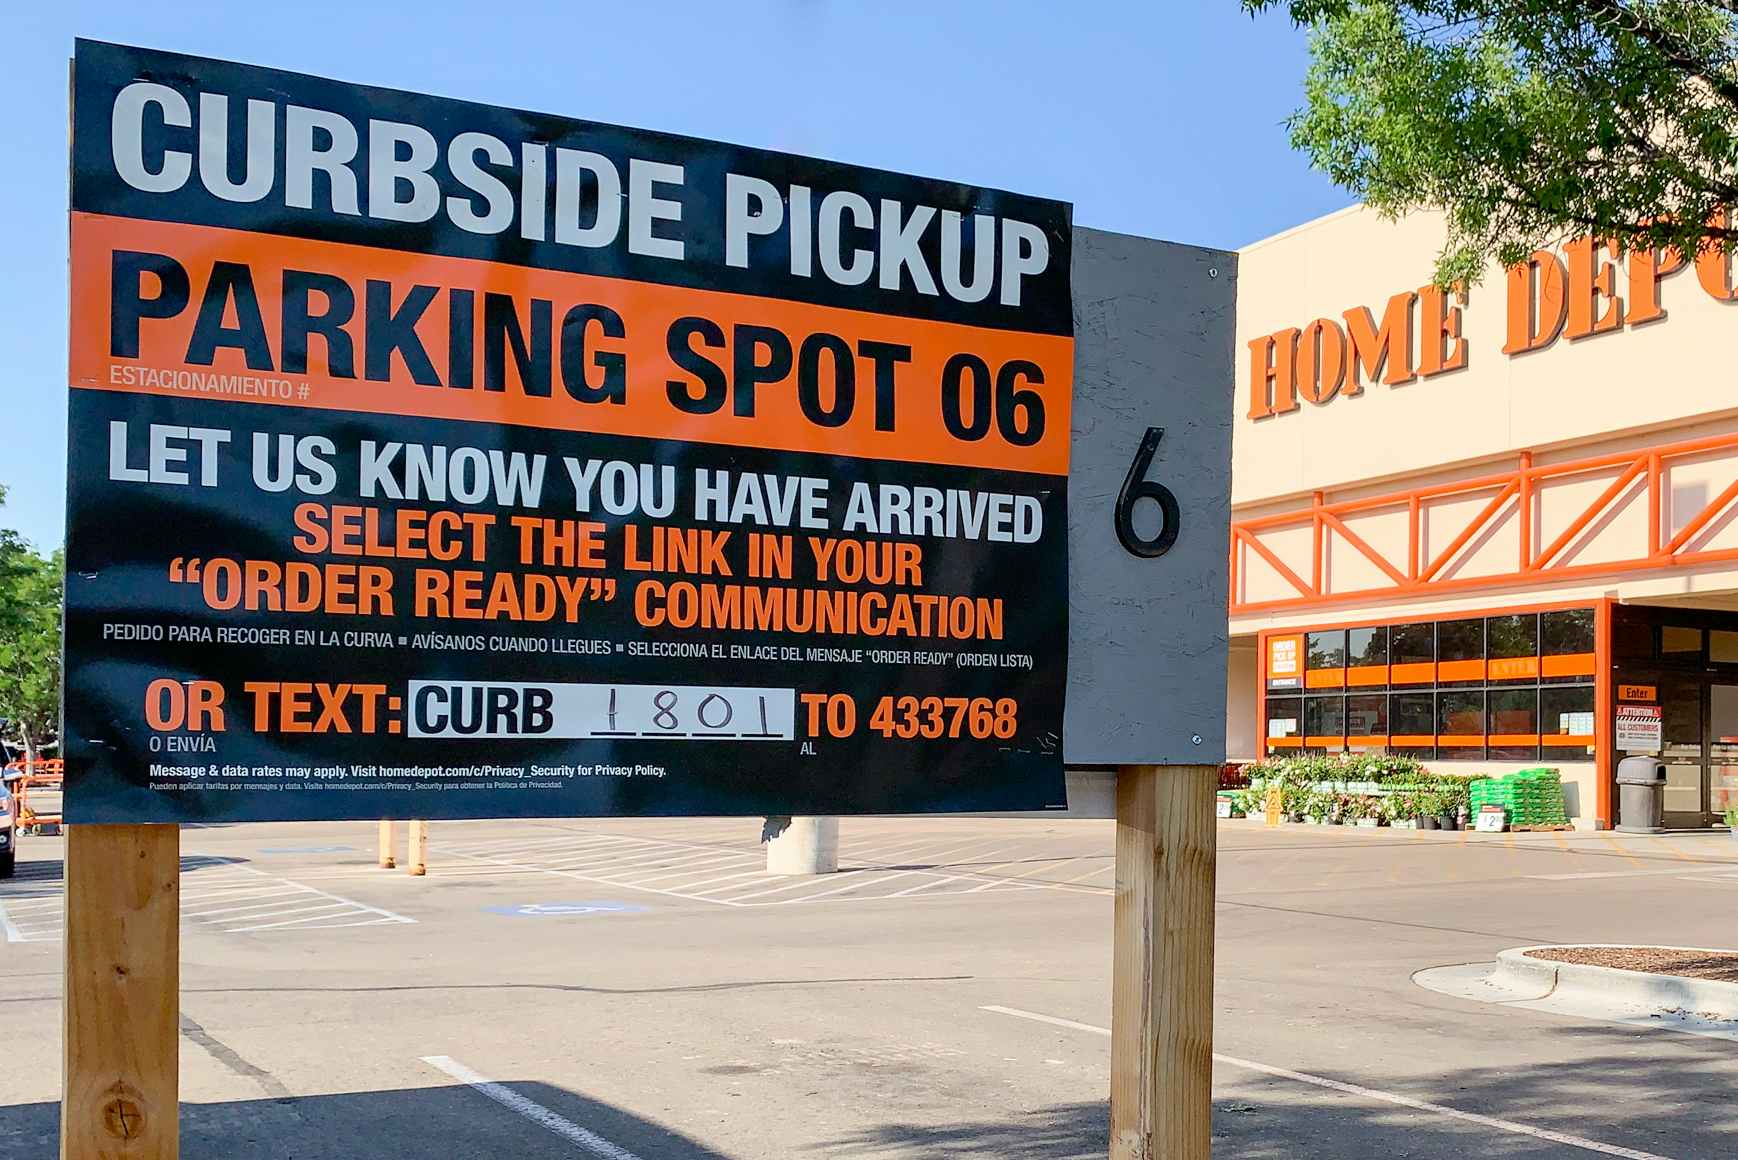 Home Depot Curbside pickup